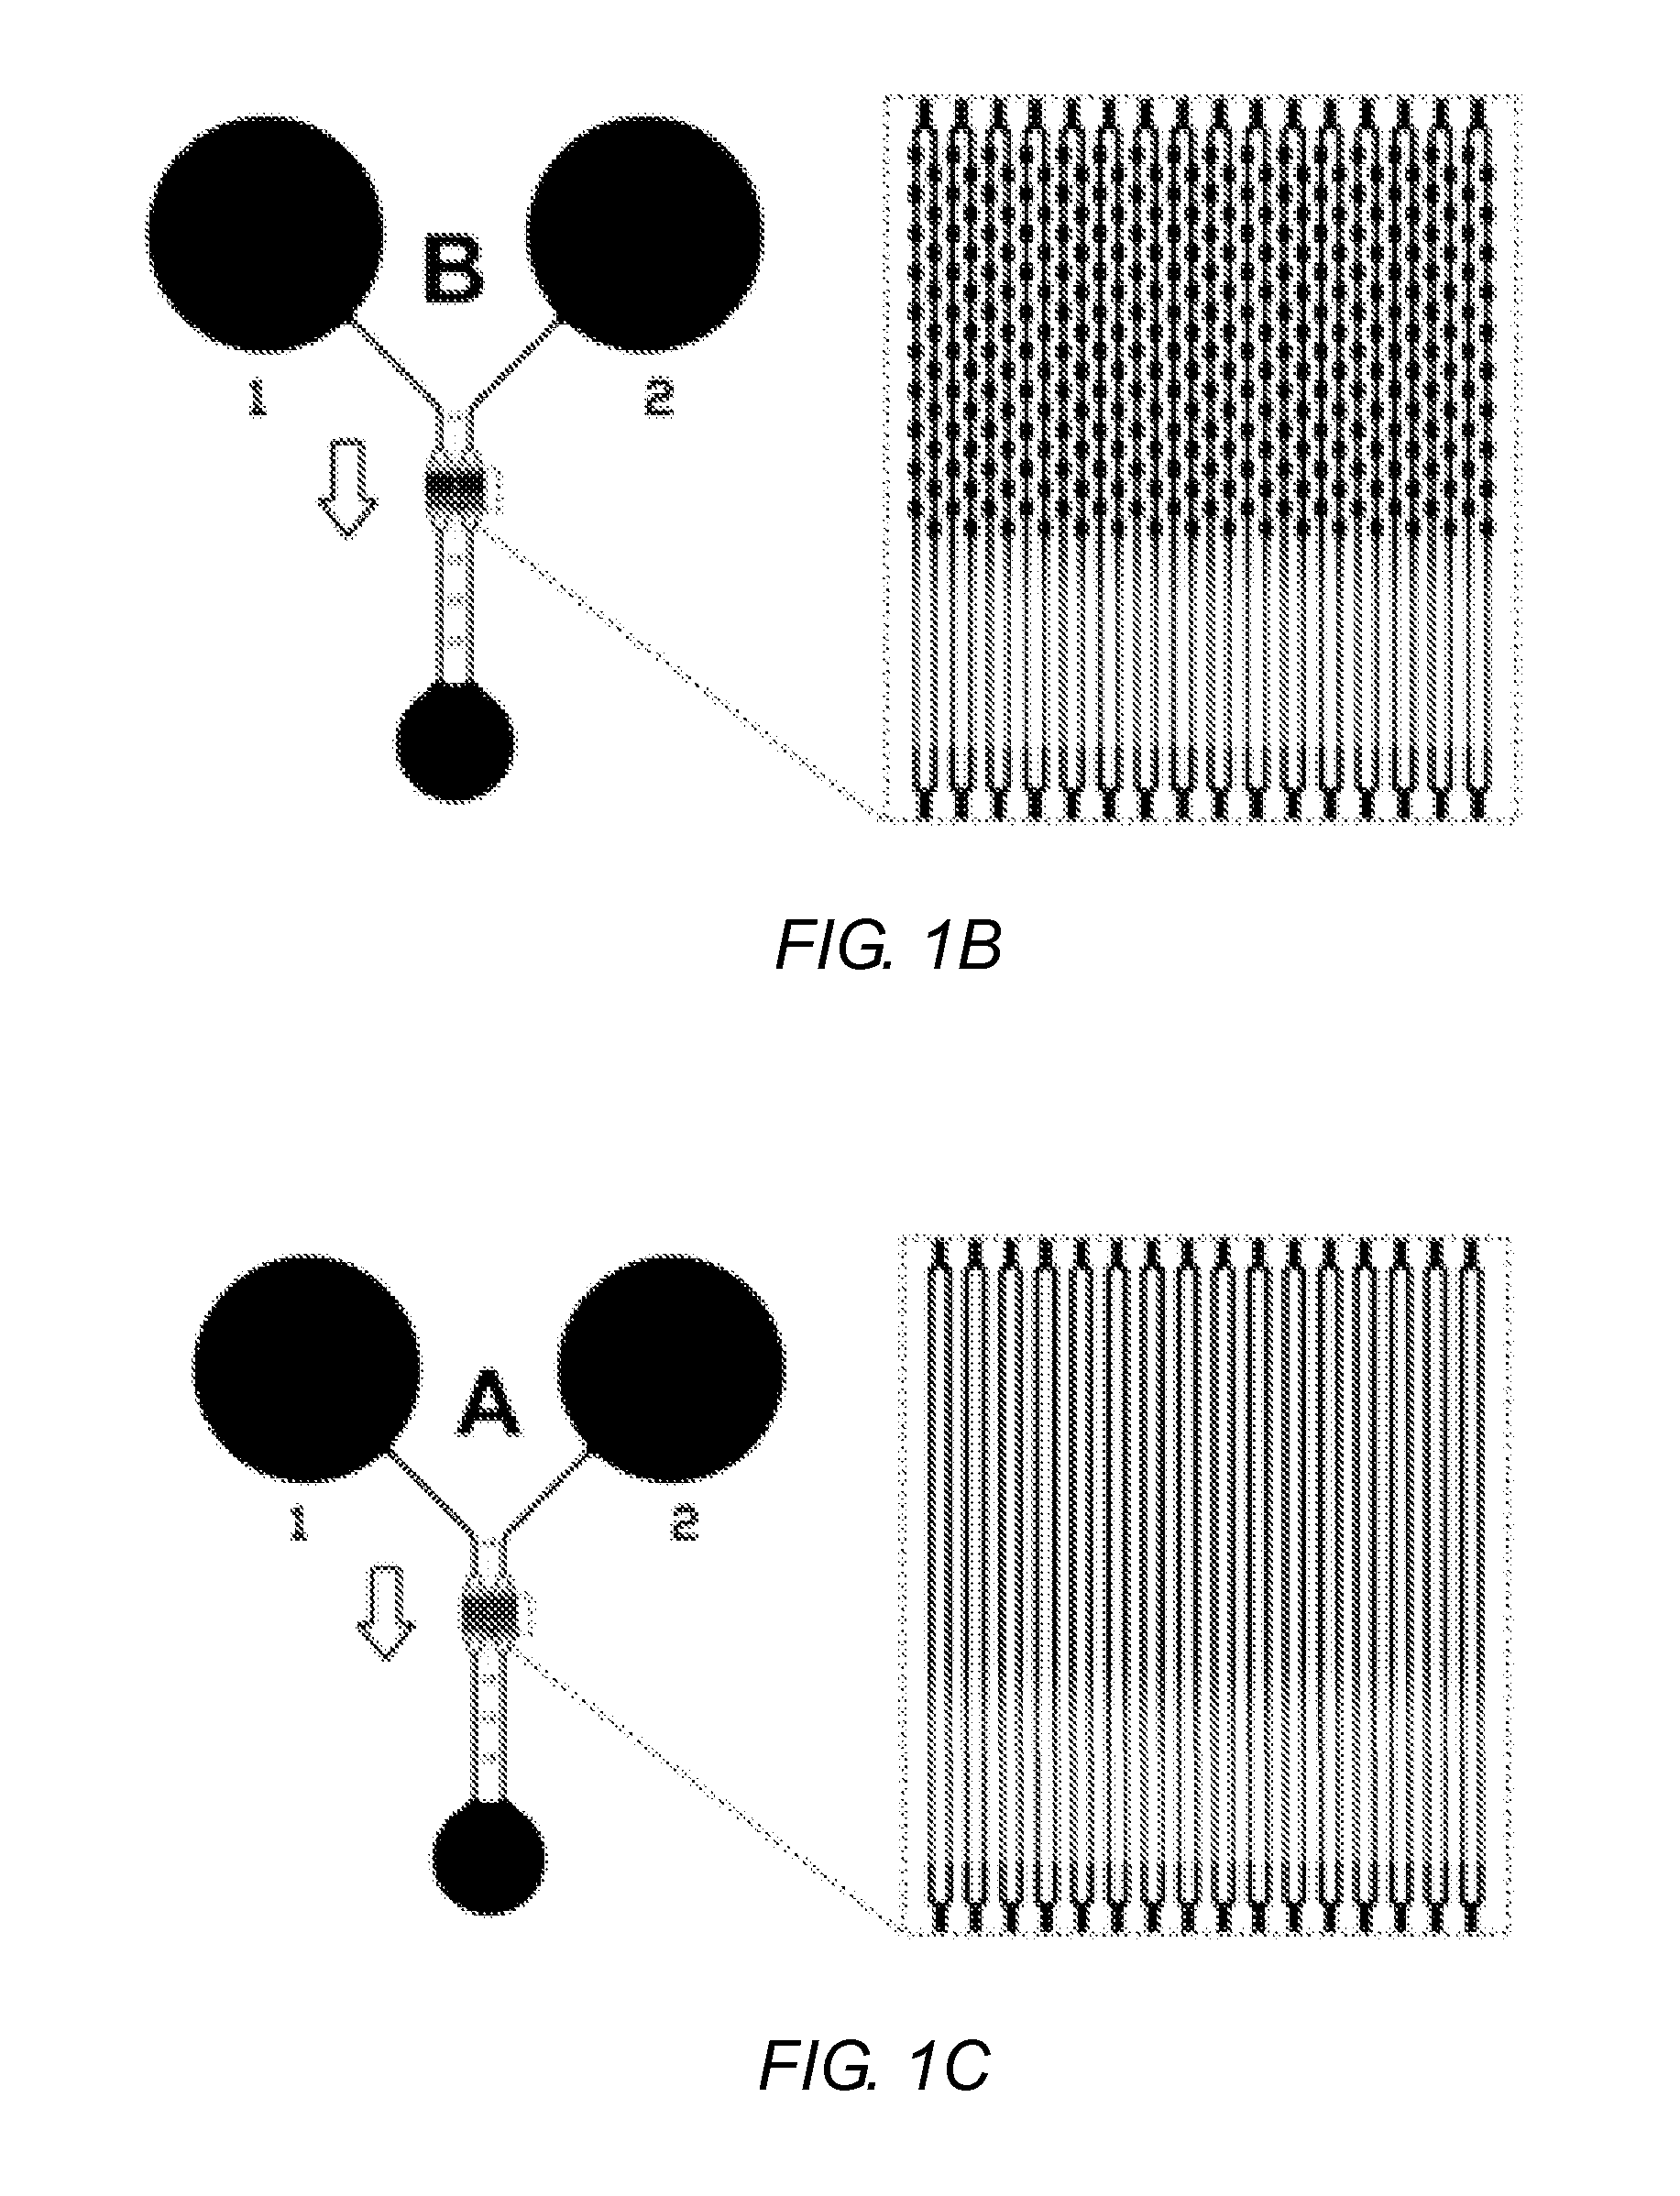 Capillary network devices and methods of use